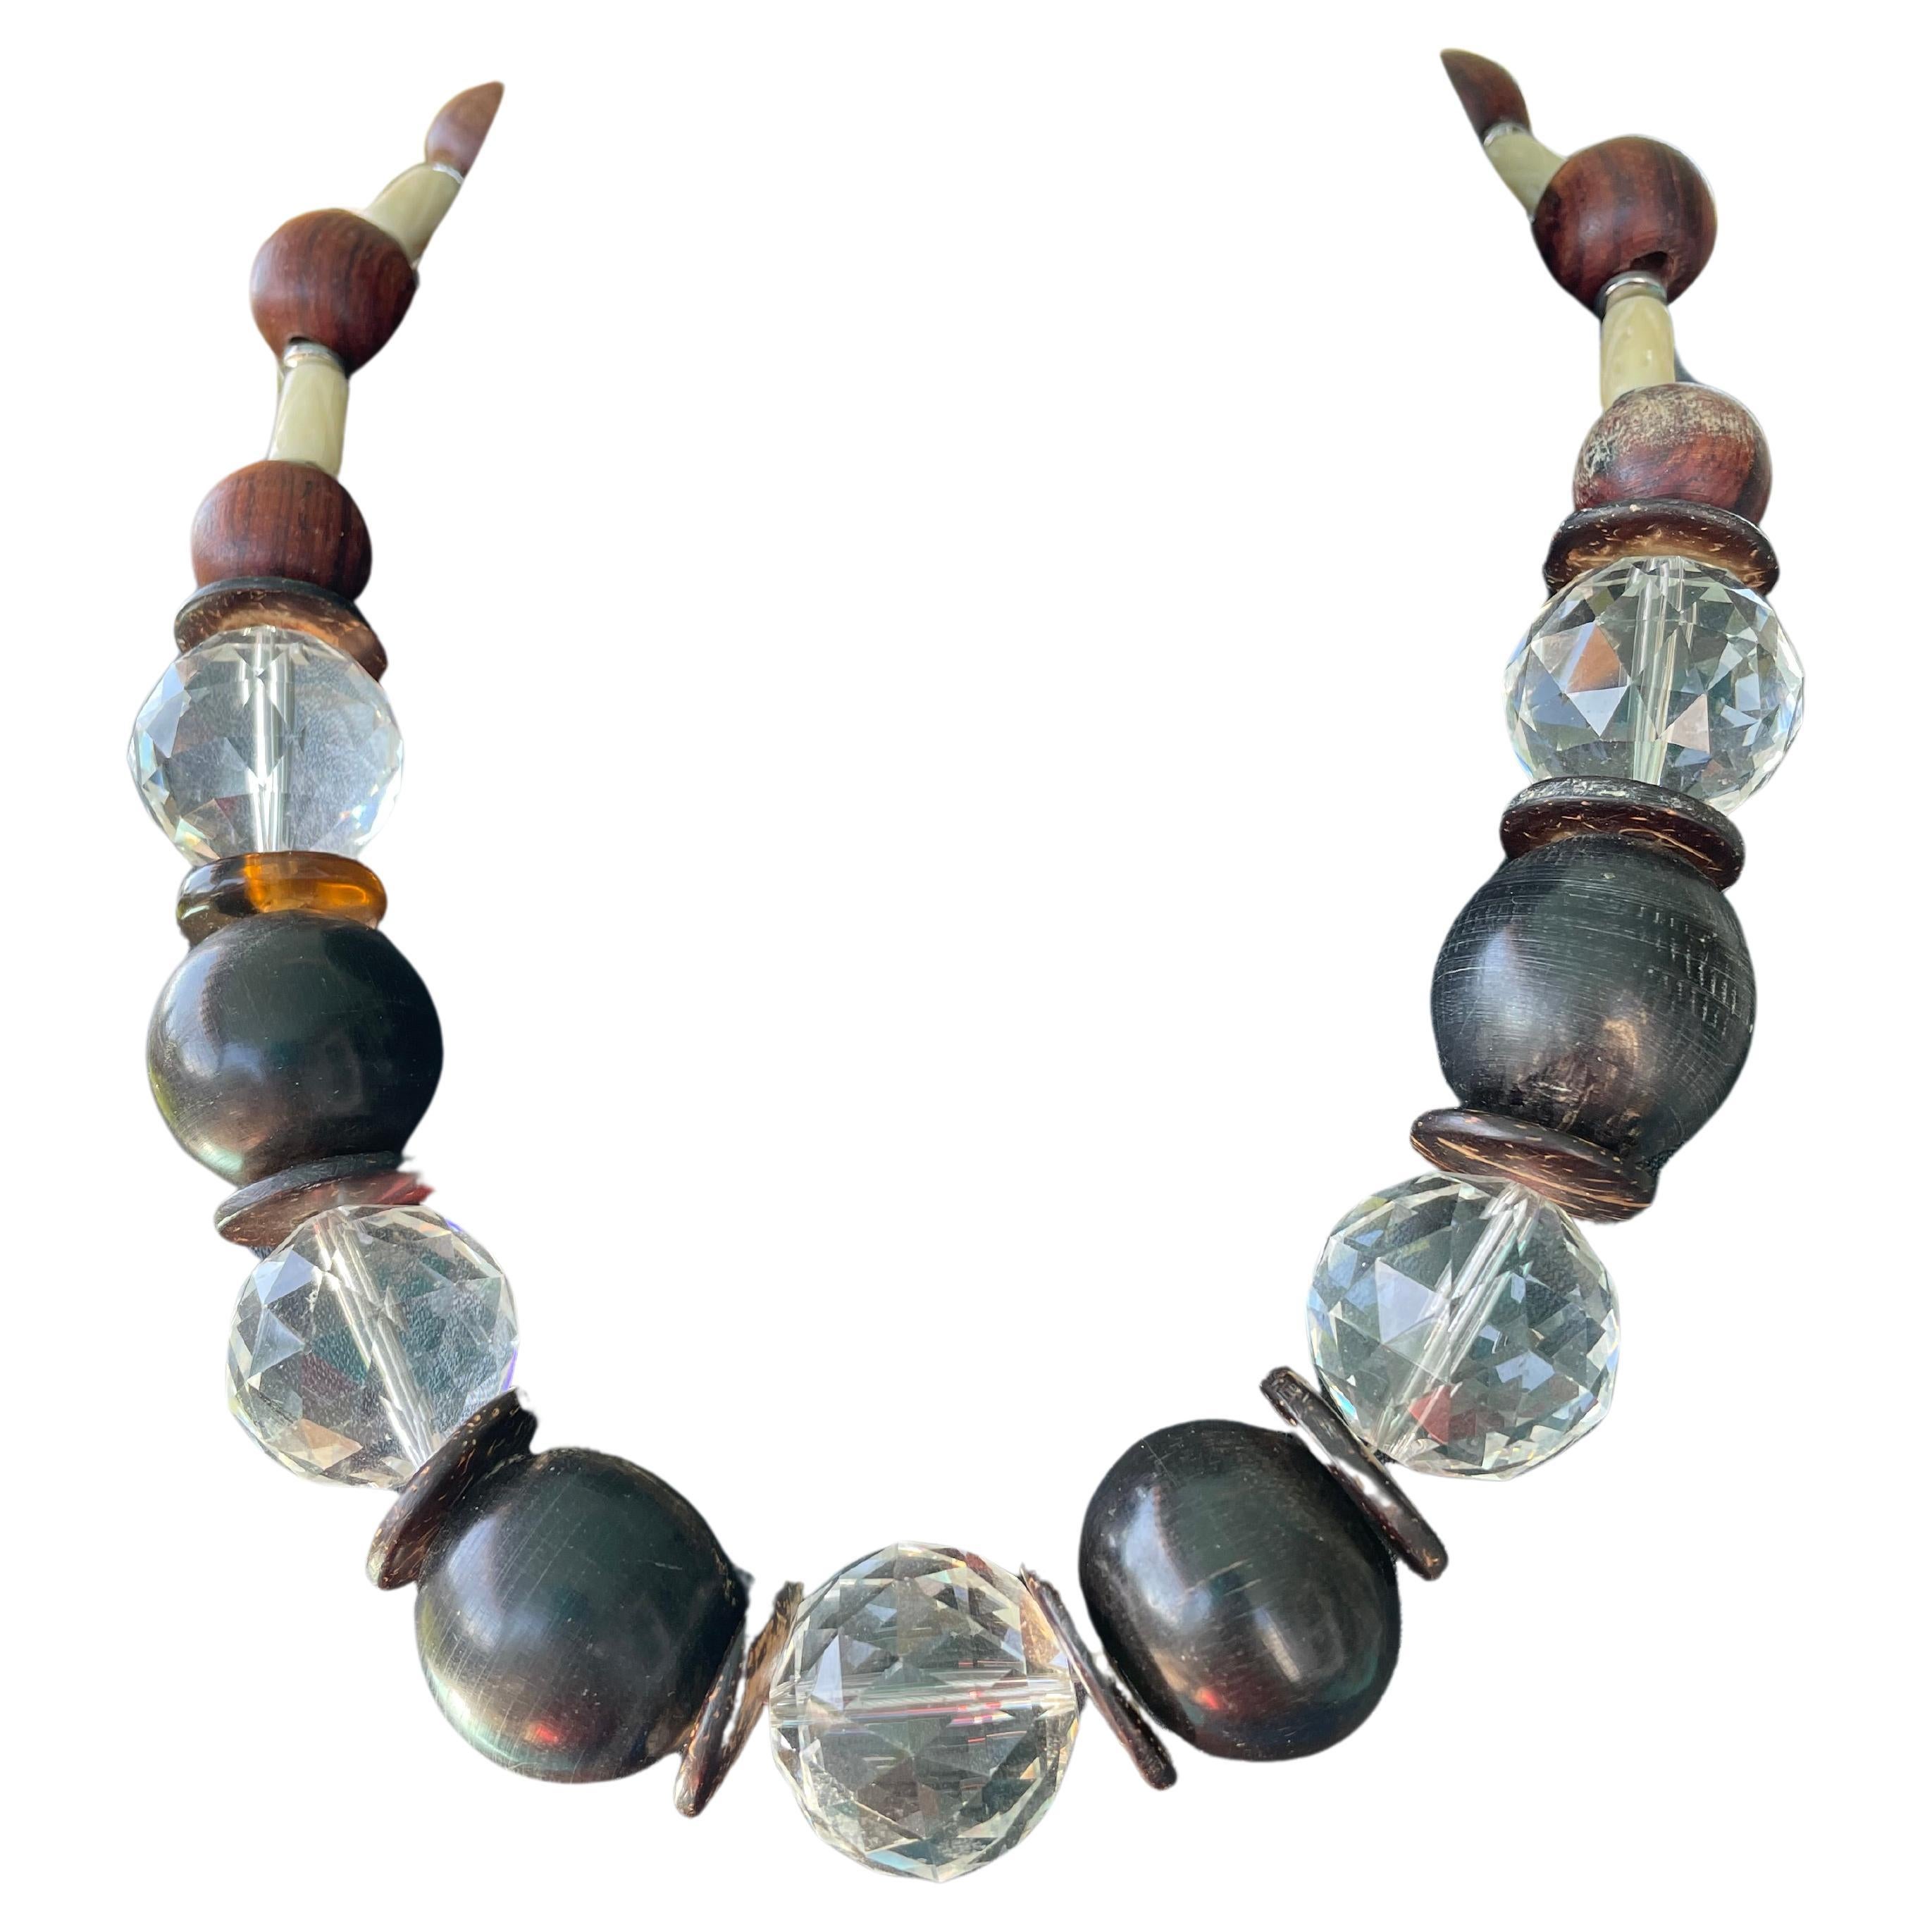 LB Vintage Resin Crystal Bone and Wood Bead Necklace on offer For Sale